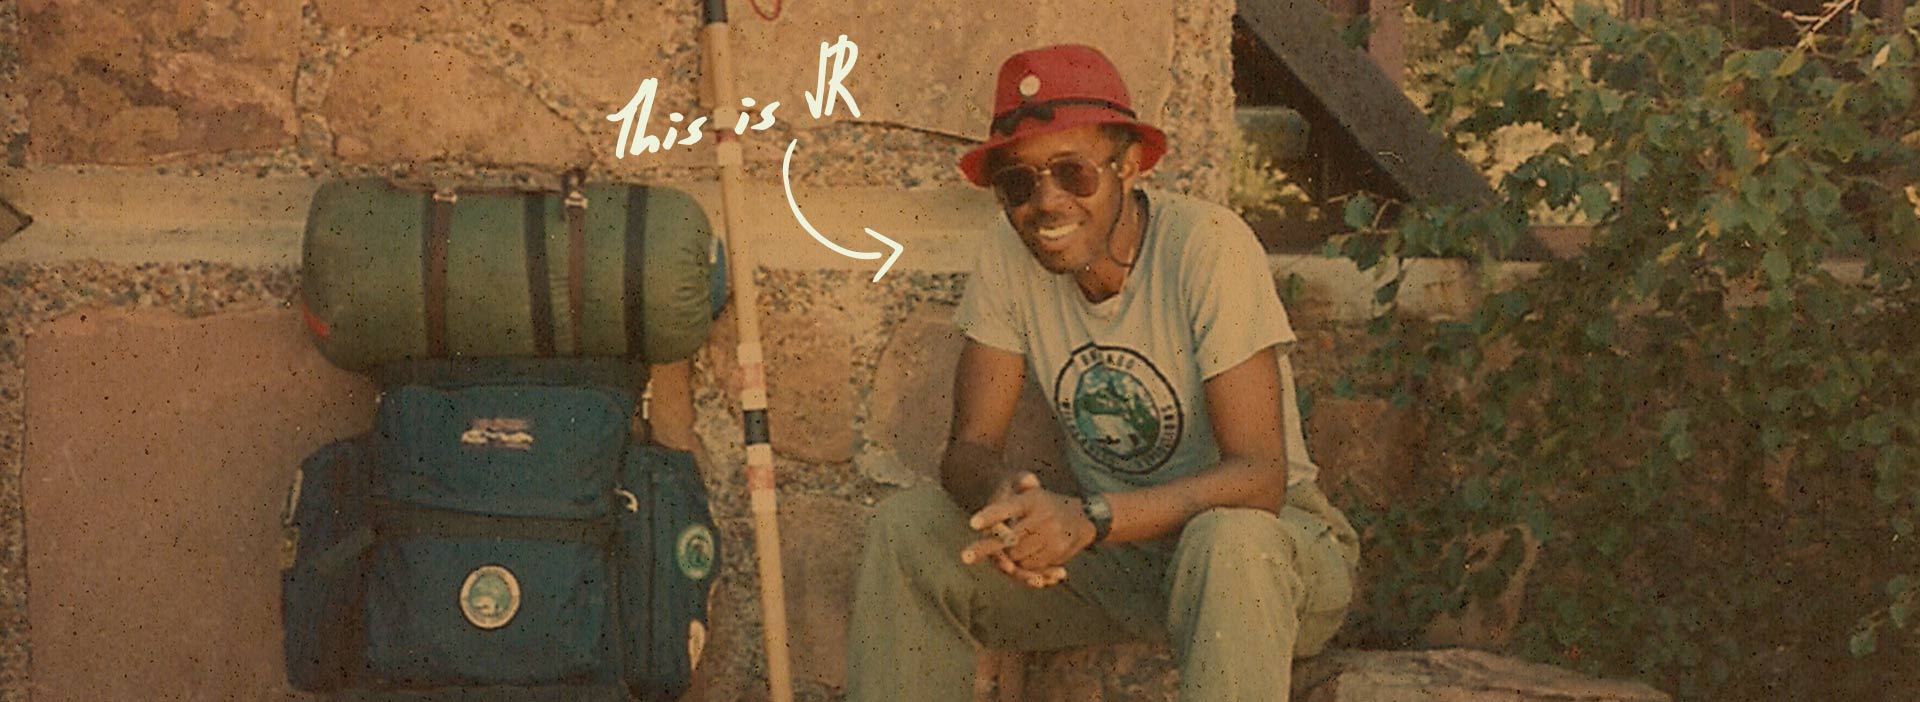 JR Harris sits on a stone ledge next to a stone wall. He's leaning forward and smiling, elbows resting on his knees. He wears a red hat, sunglasses, tshirt, and pants. Next to him, resting against a stone wall is a backback and walking stick.